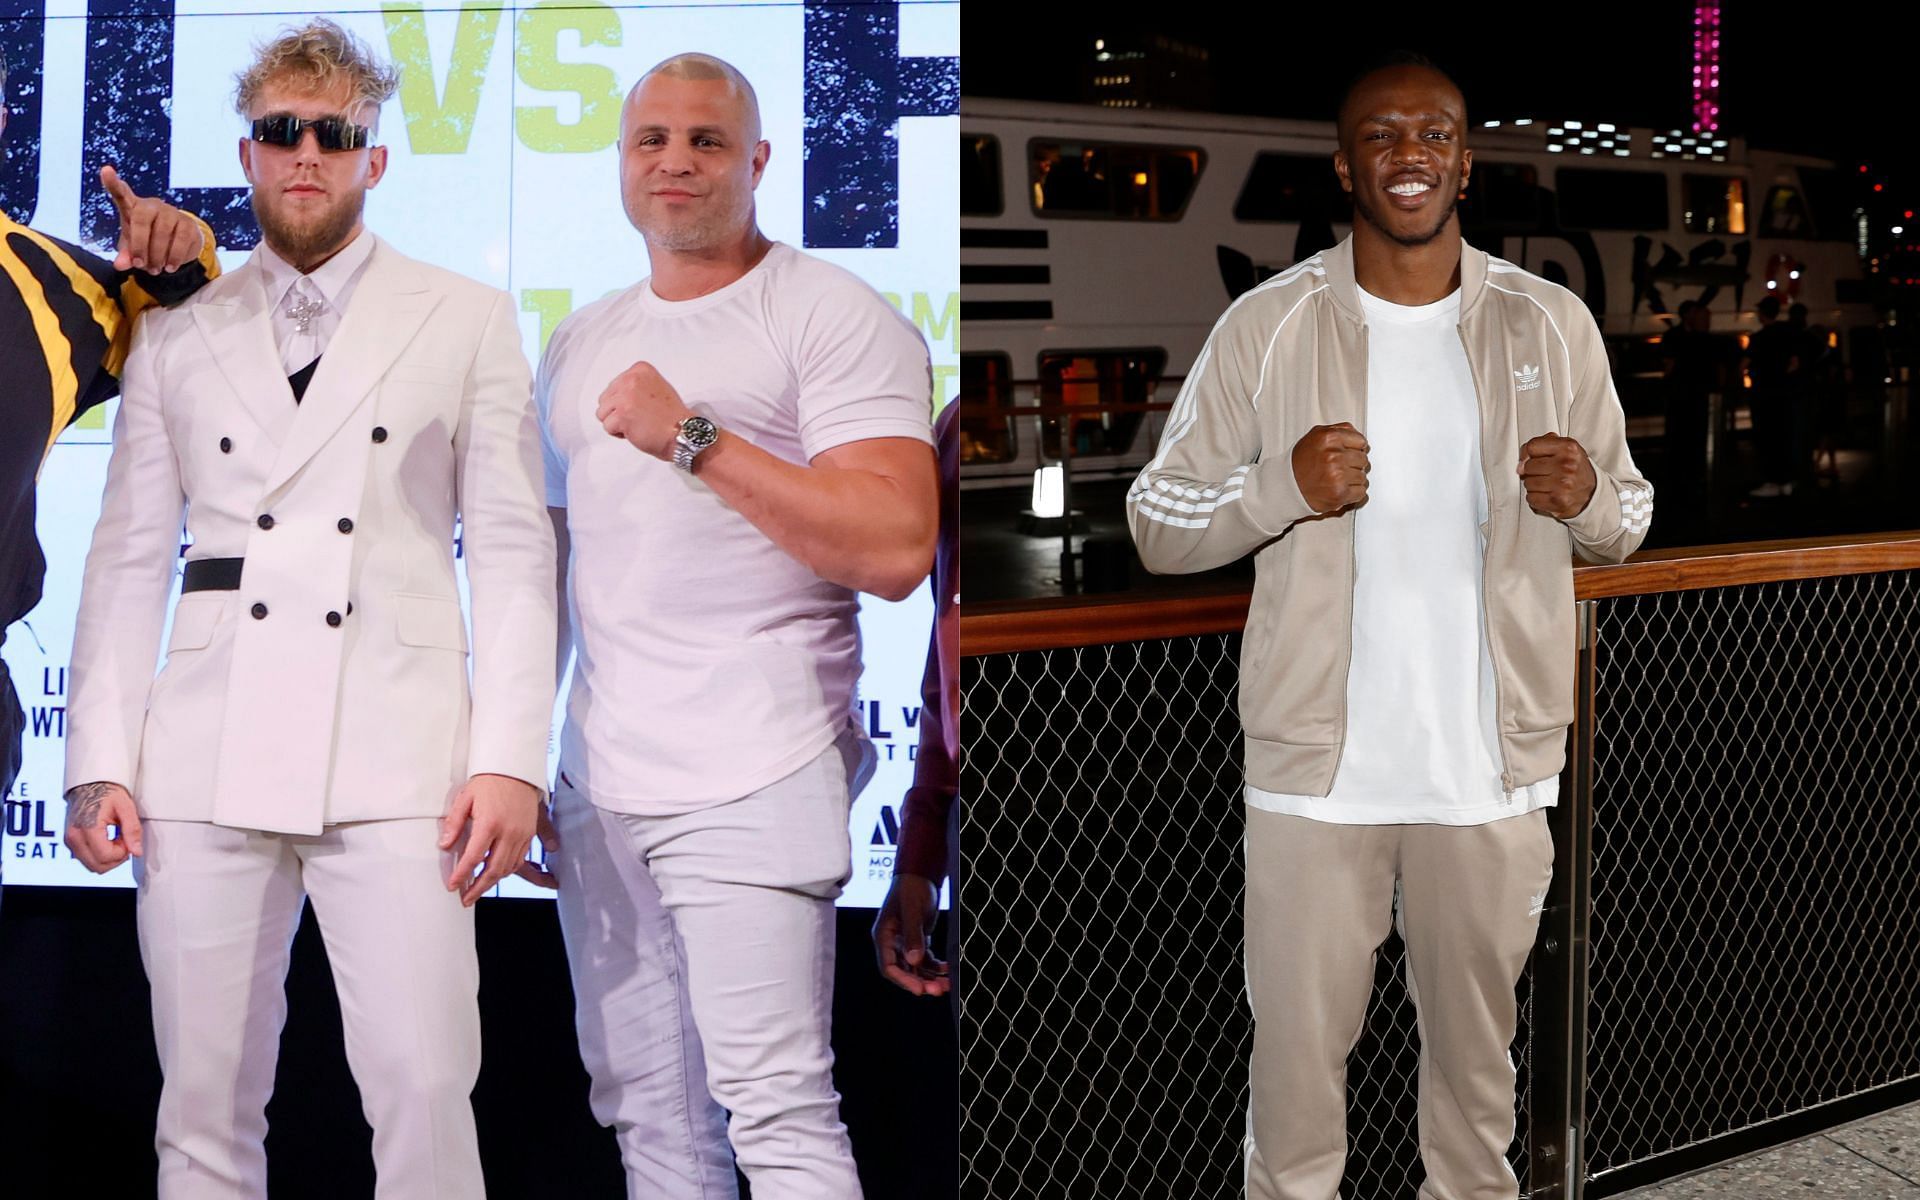 Jake Paul with BJ Flores (left) and KSI (right) (Image credits Getty Images)